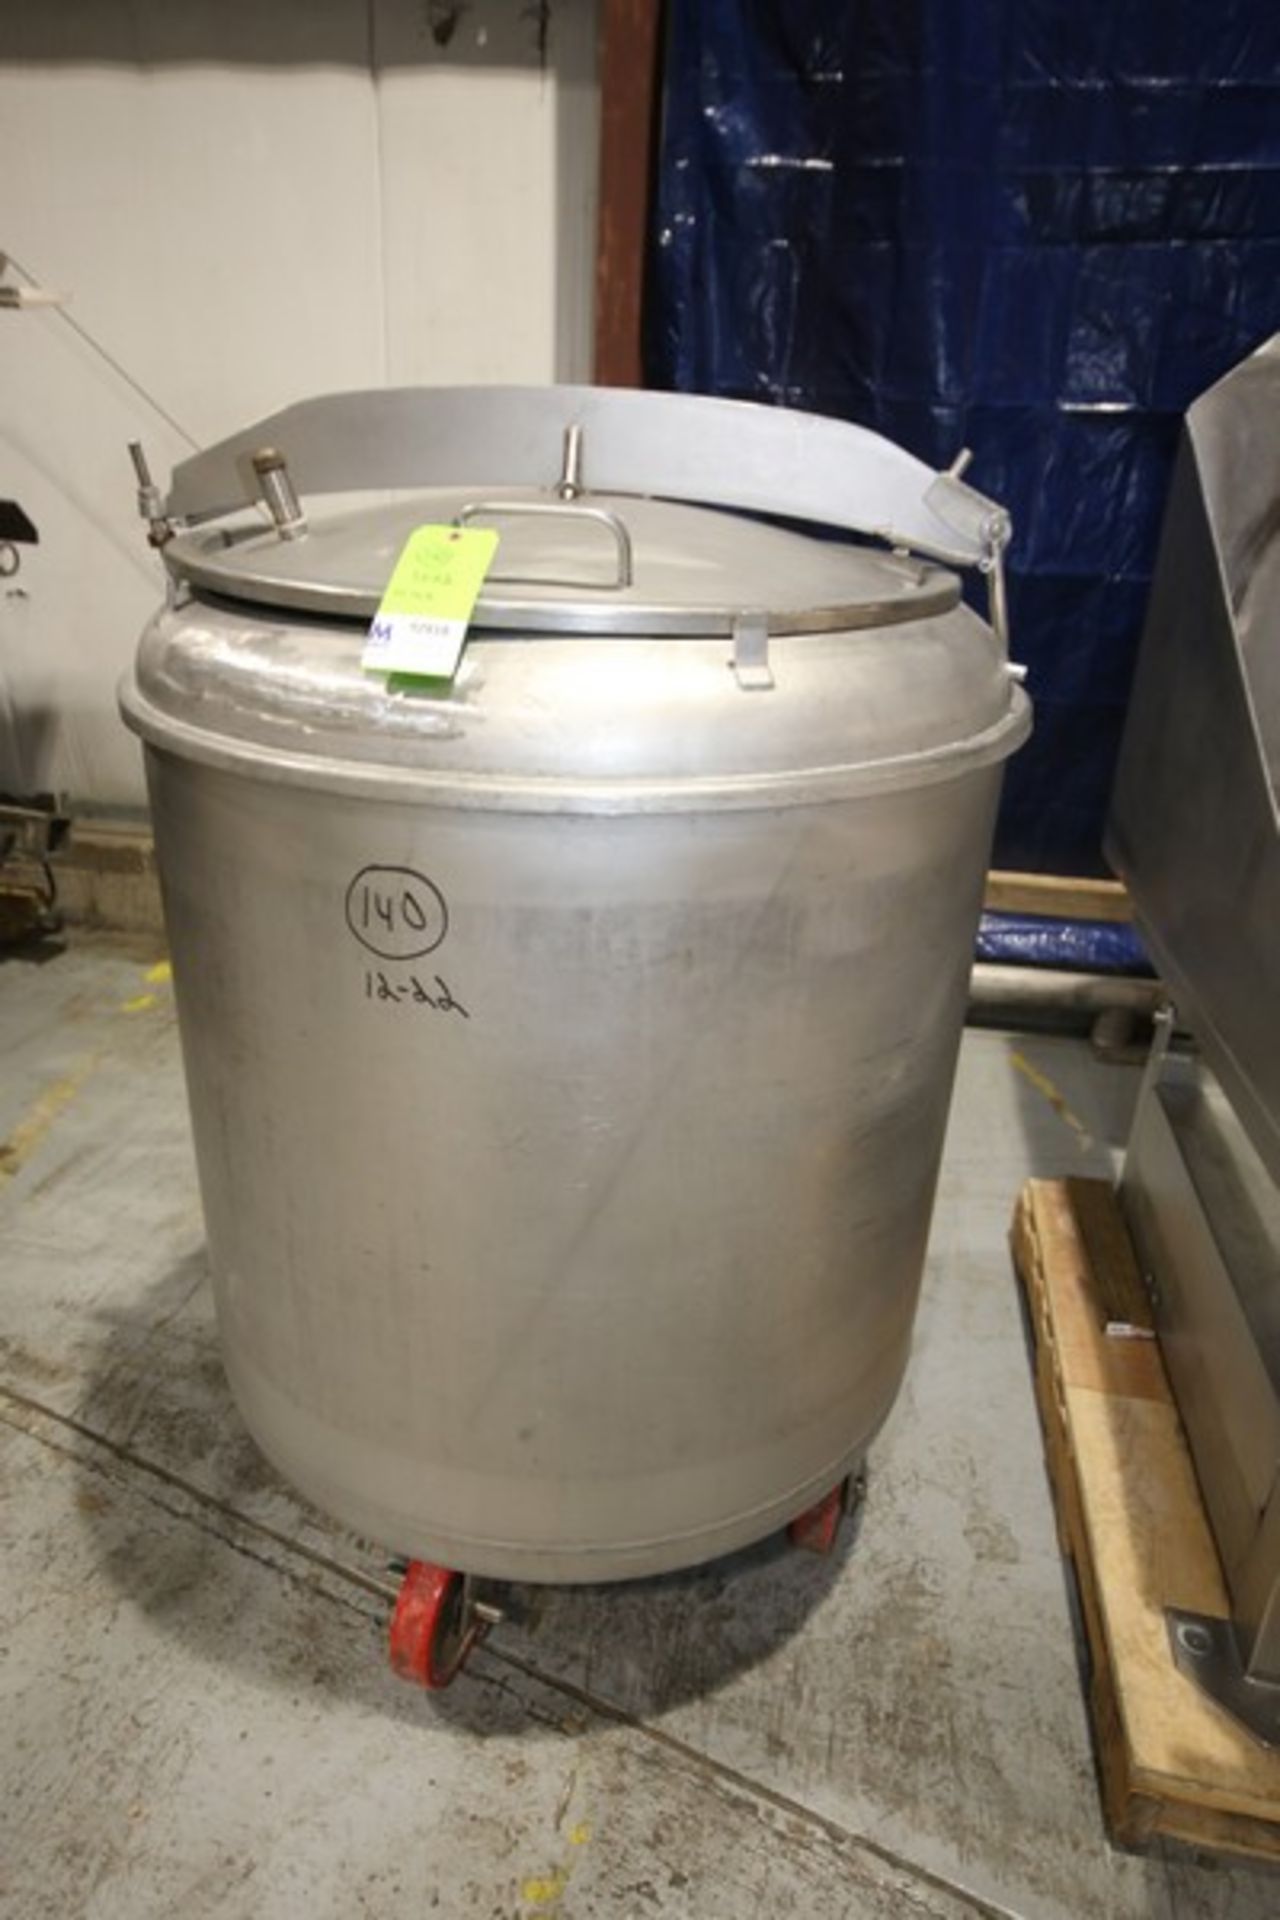 Aprox. 39" W x 46" H Portable S/S Tanks, with Welded Inside Baffles & Lid (INV#92818) (Located @ the